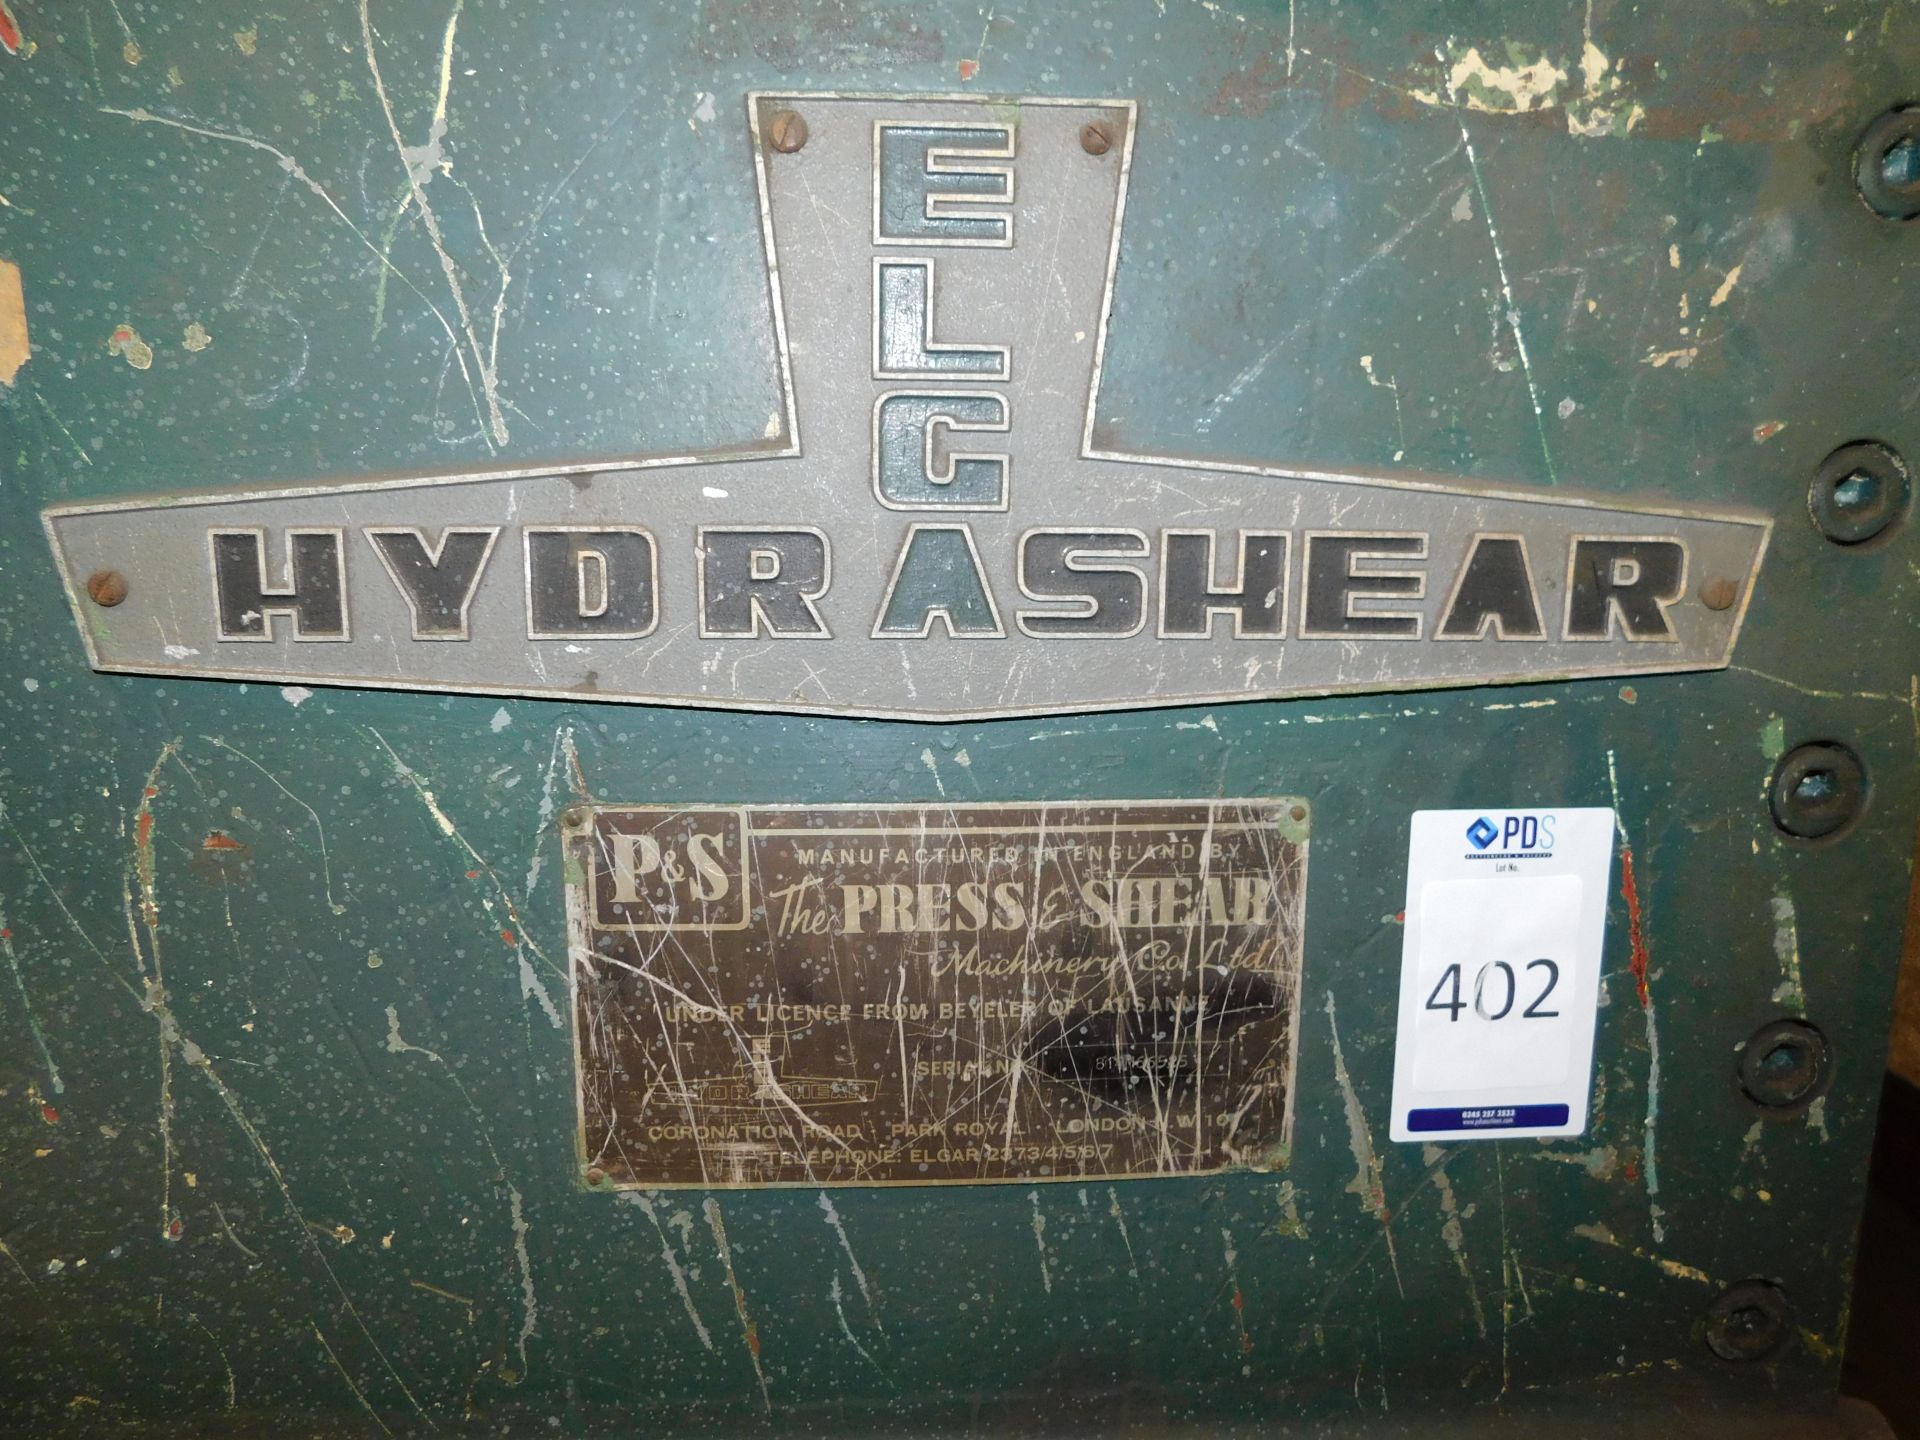 Elga Hydrashear Guillotine, Serial Number; 814M66525, Manufactured by The Press & Shear Machinery Co - Image 6 of 11